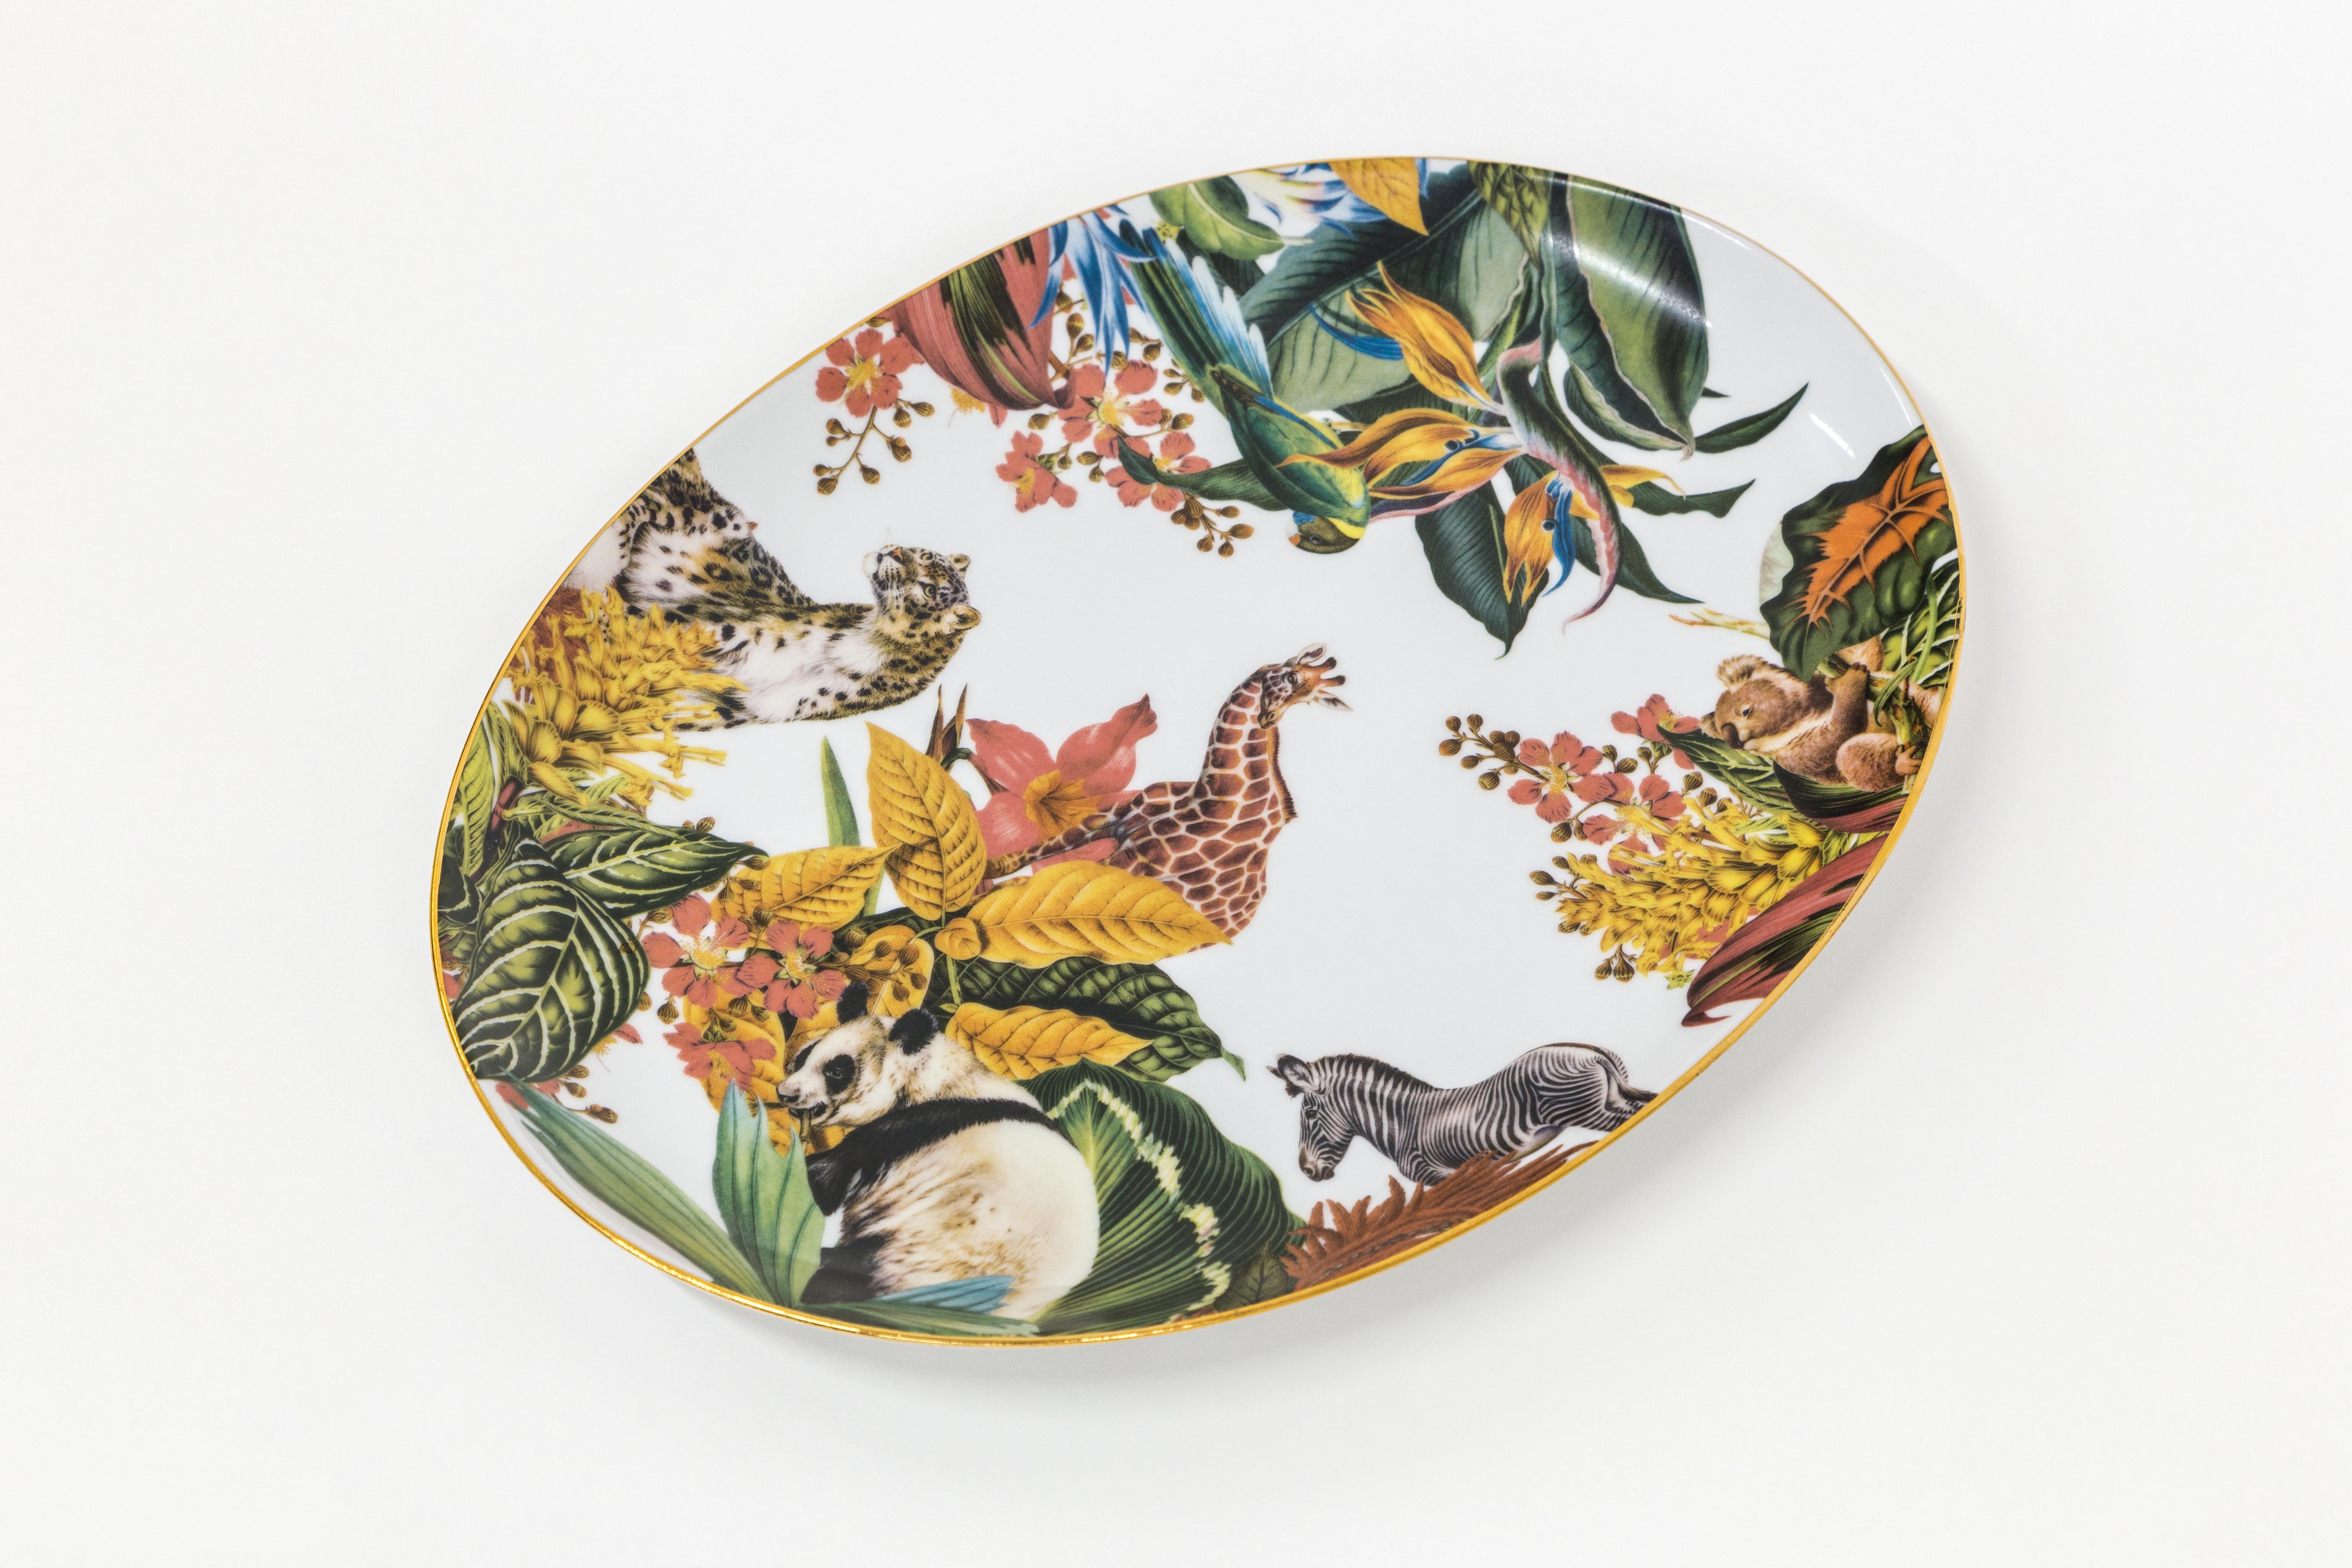 This 28x38cm oval tray is part of Animalia collection by Grand Tour by Vito Nesta. The classic and versatile shape is a must-have inside any home to embellish a table or beautify a wall. The rich design of tropical flowers hides several peeping